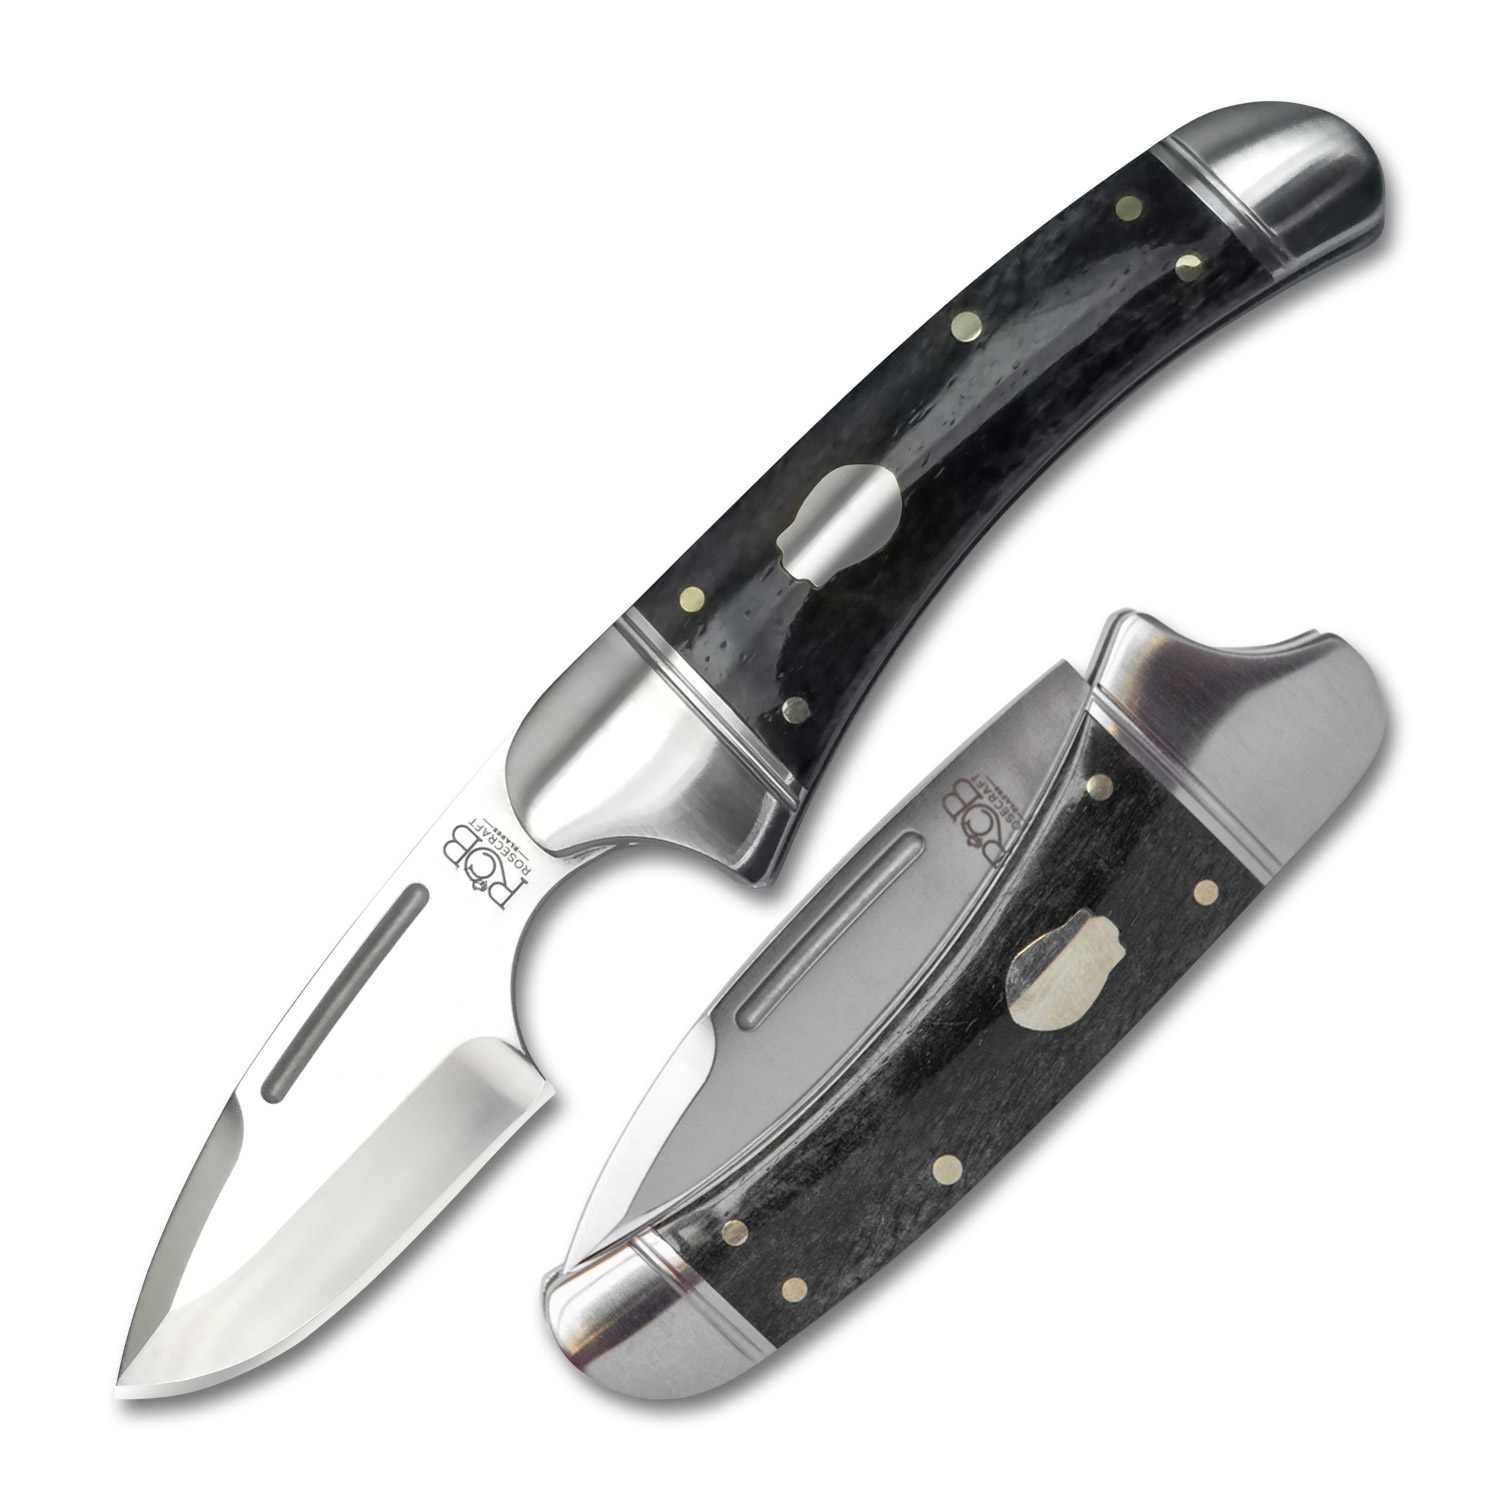 Buy RoseCraft Blades at Cyclaire Knives and Tools